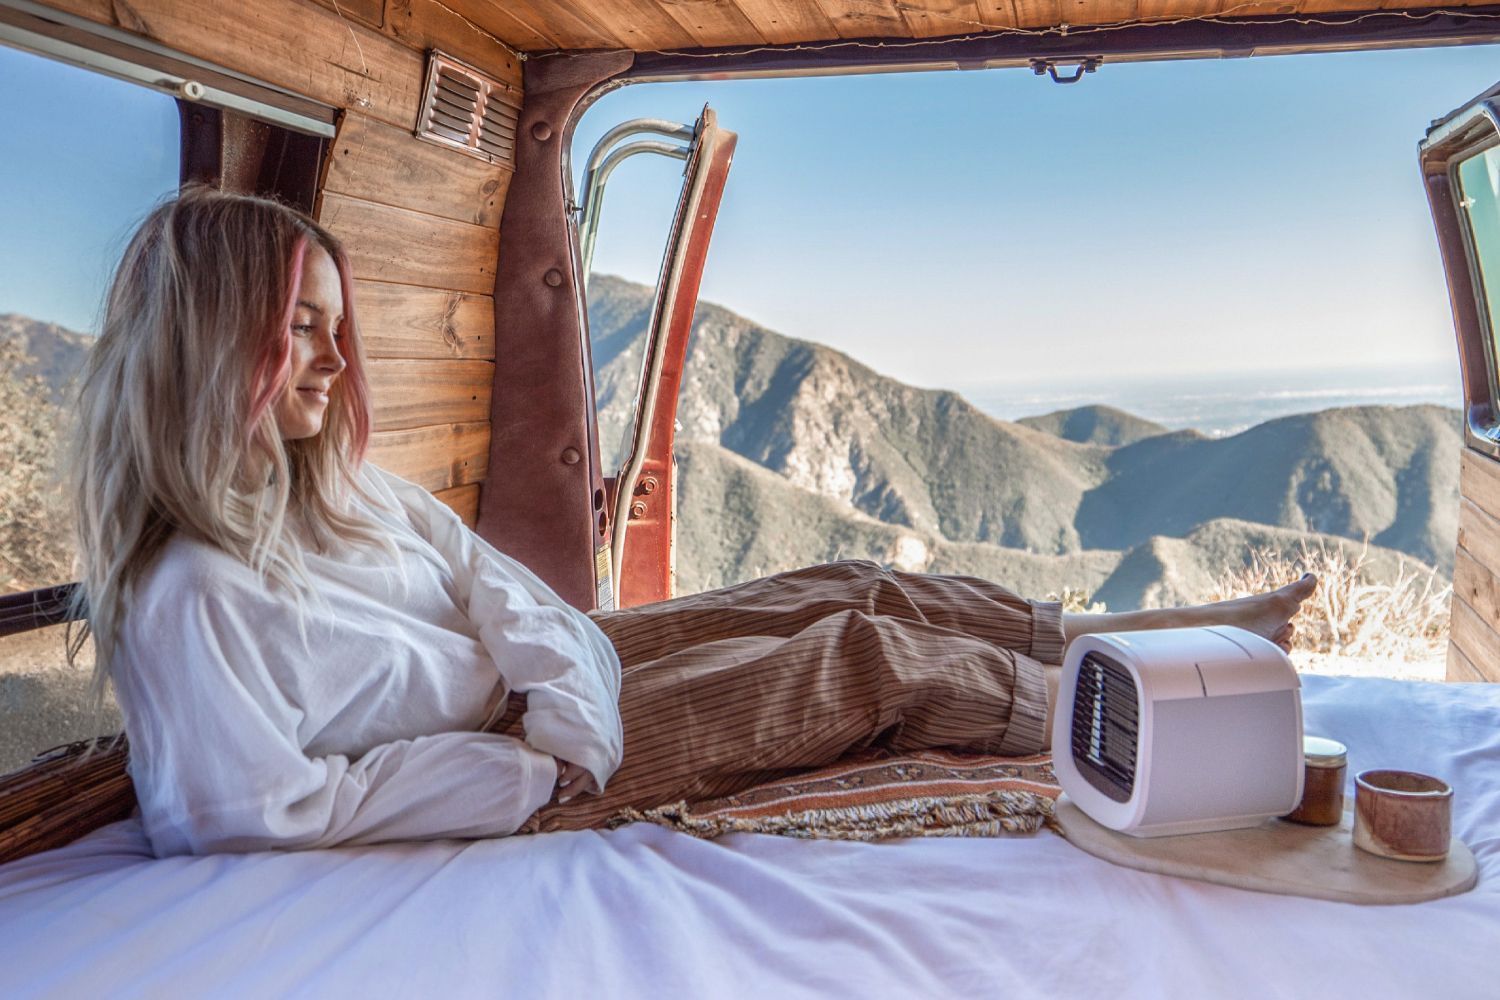 8 Hacks to Keep Your RV Cool in Extreme Summer Heat